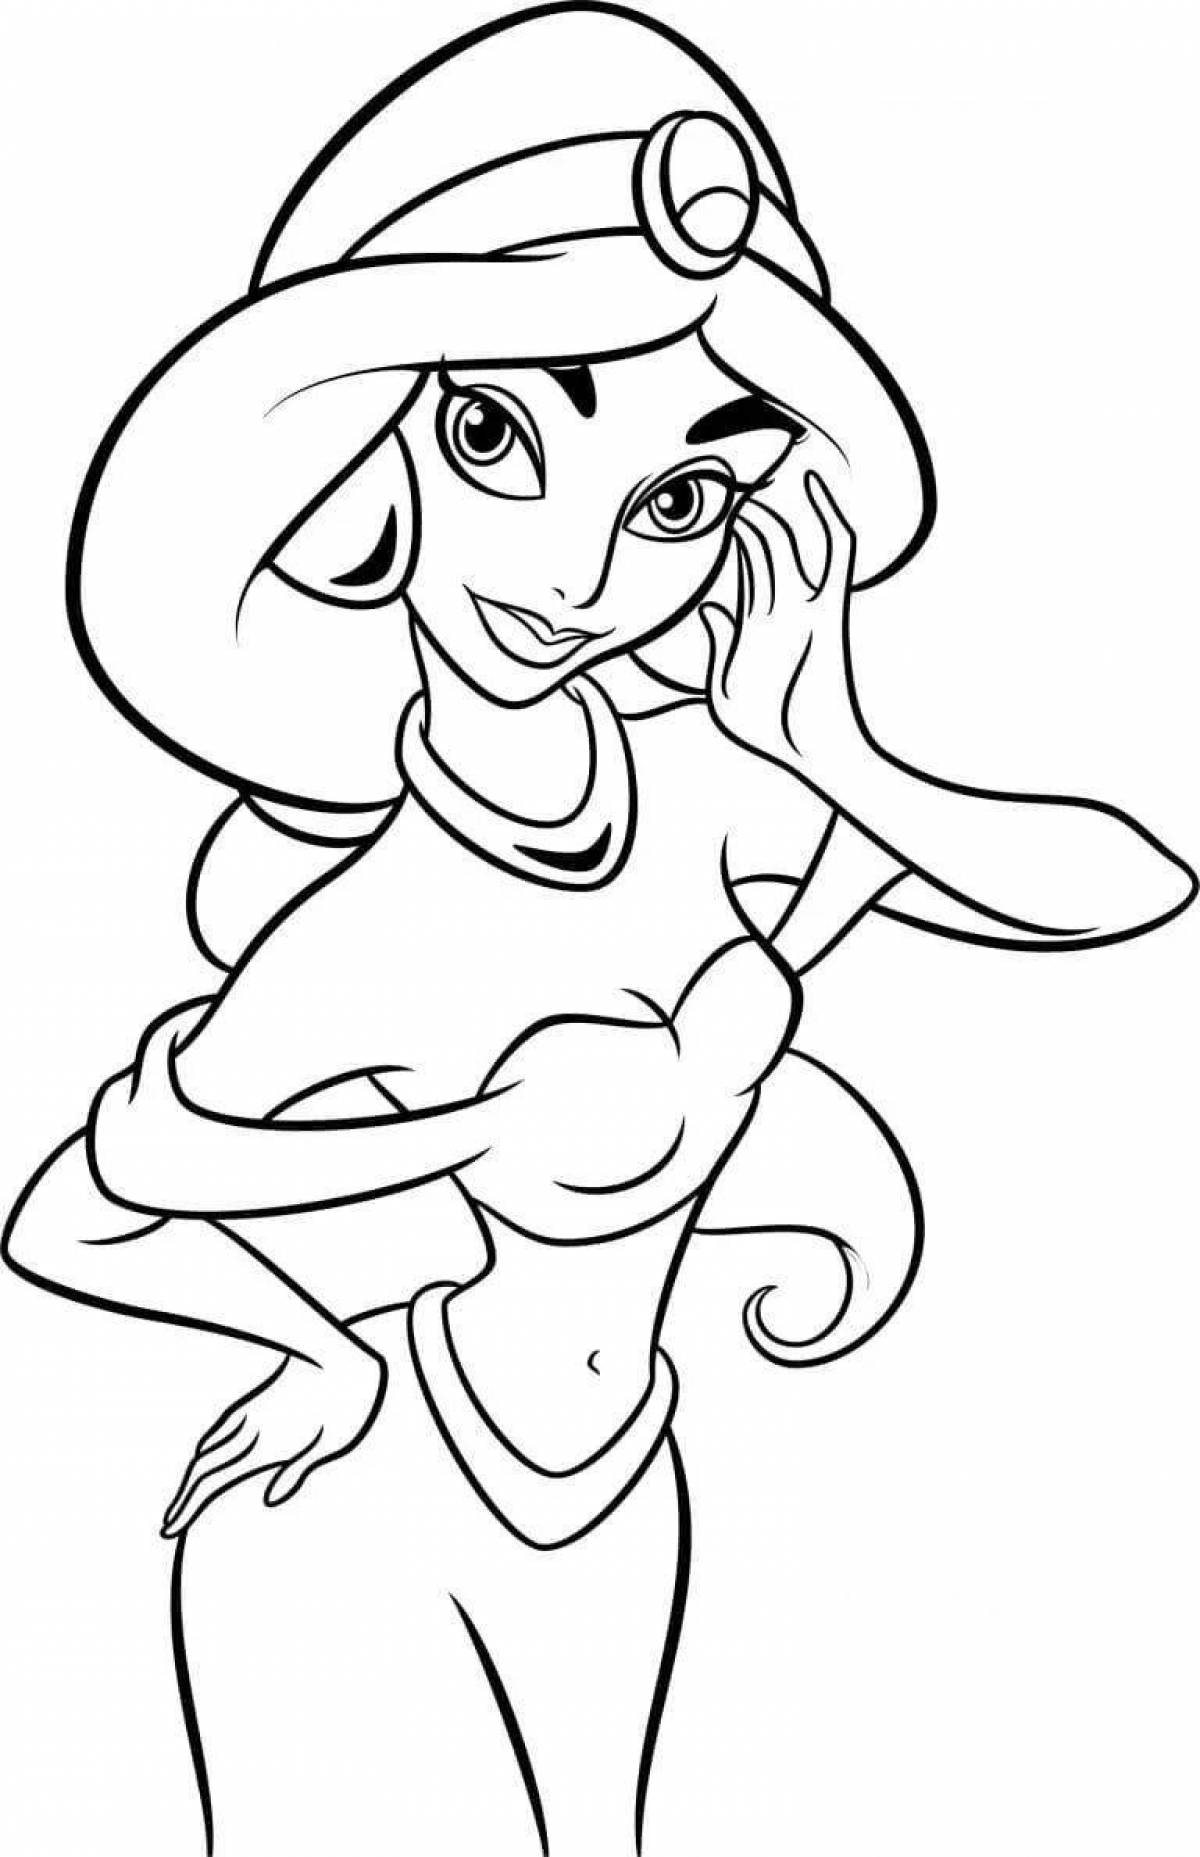 Charming jasmine coloring book